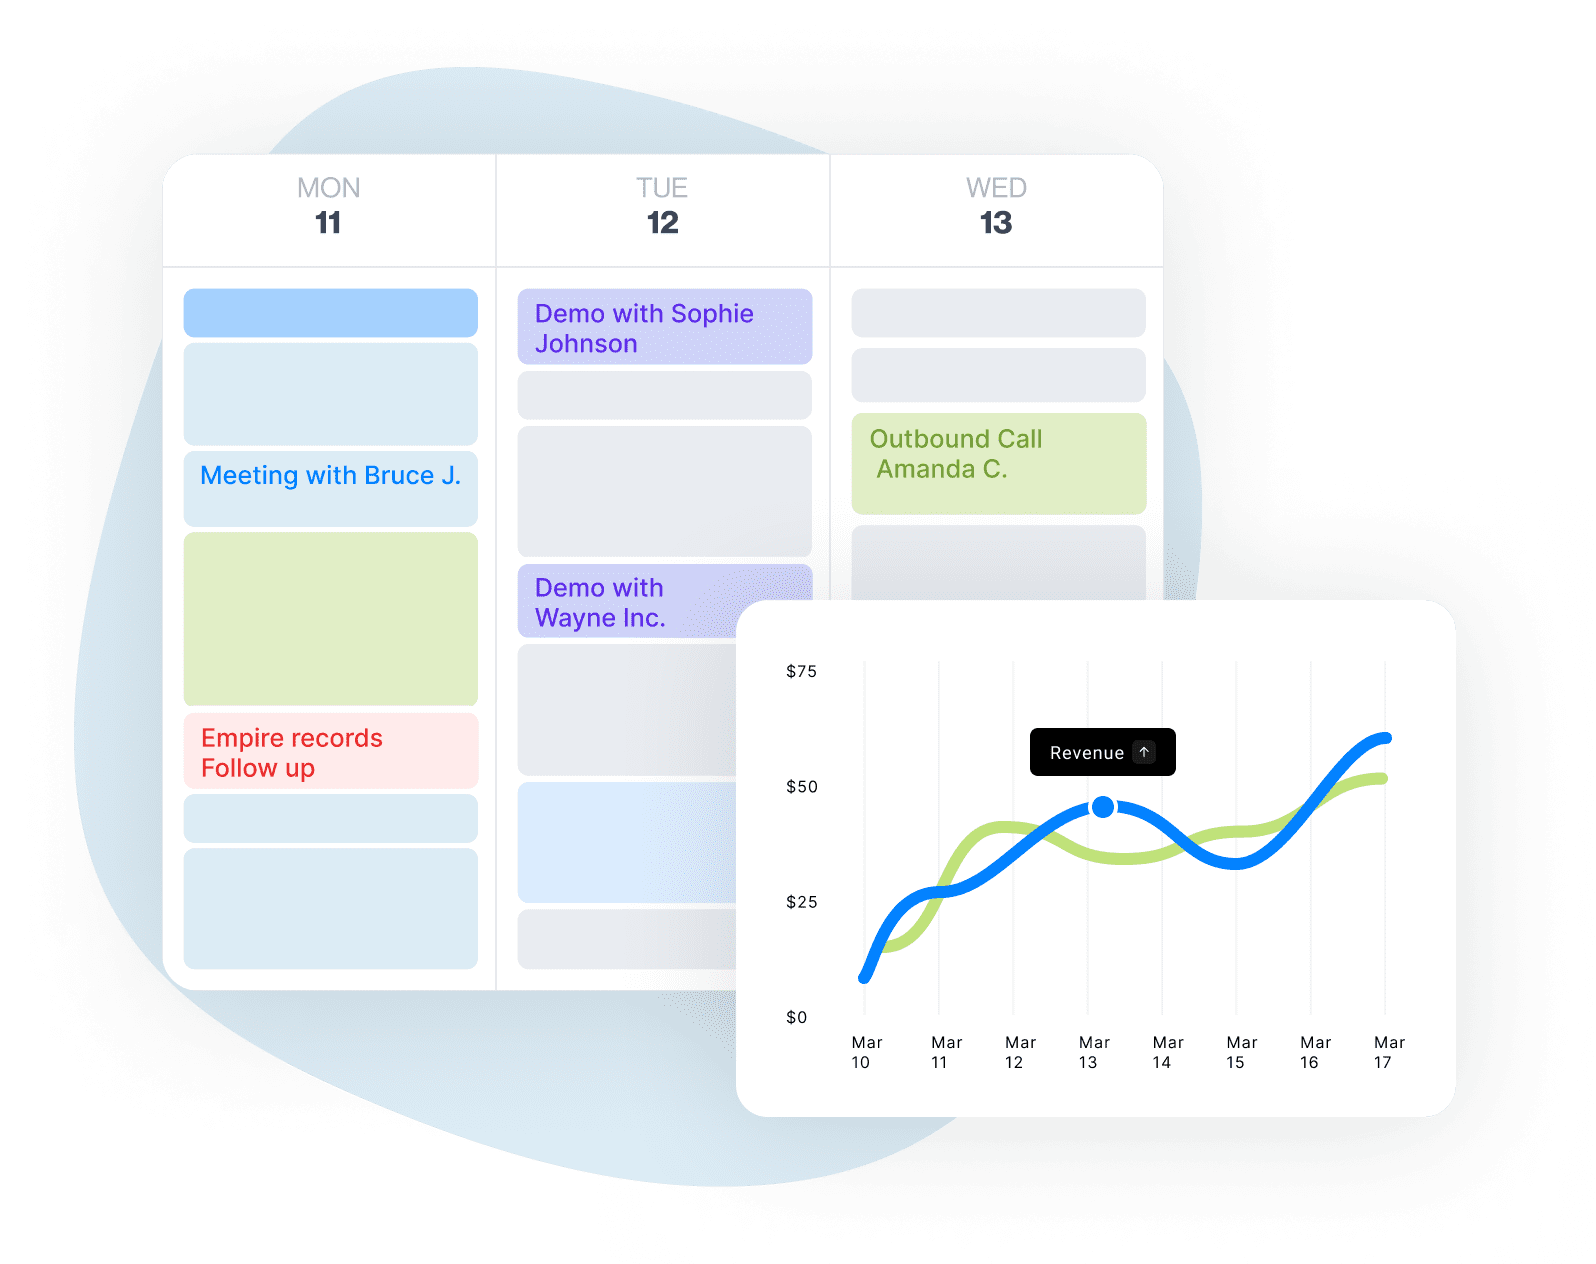 Image of booked calendar and statistics of increased revenue